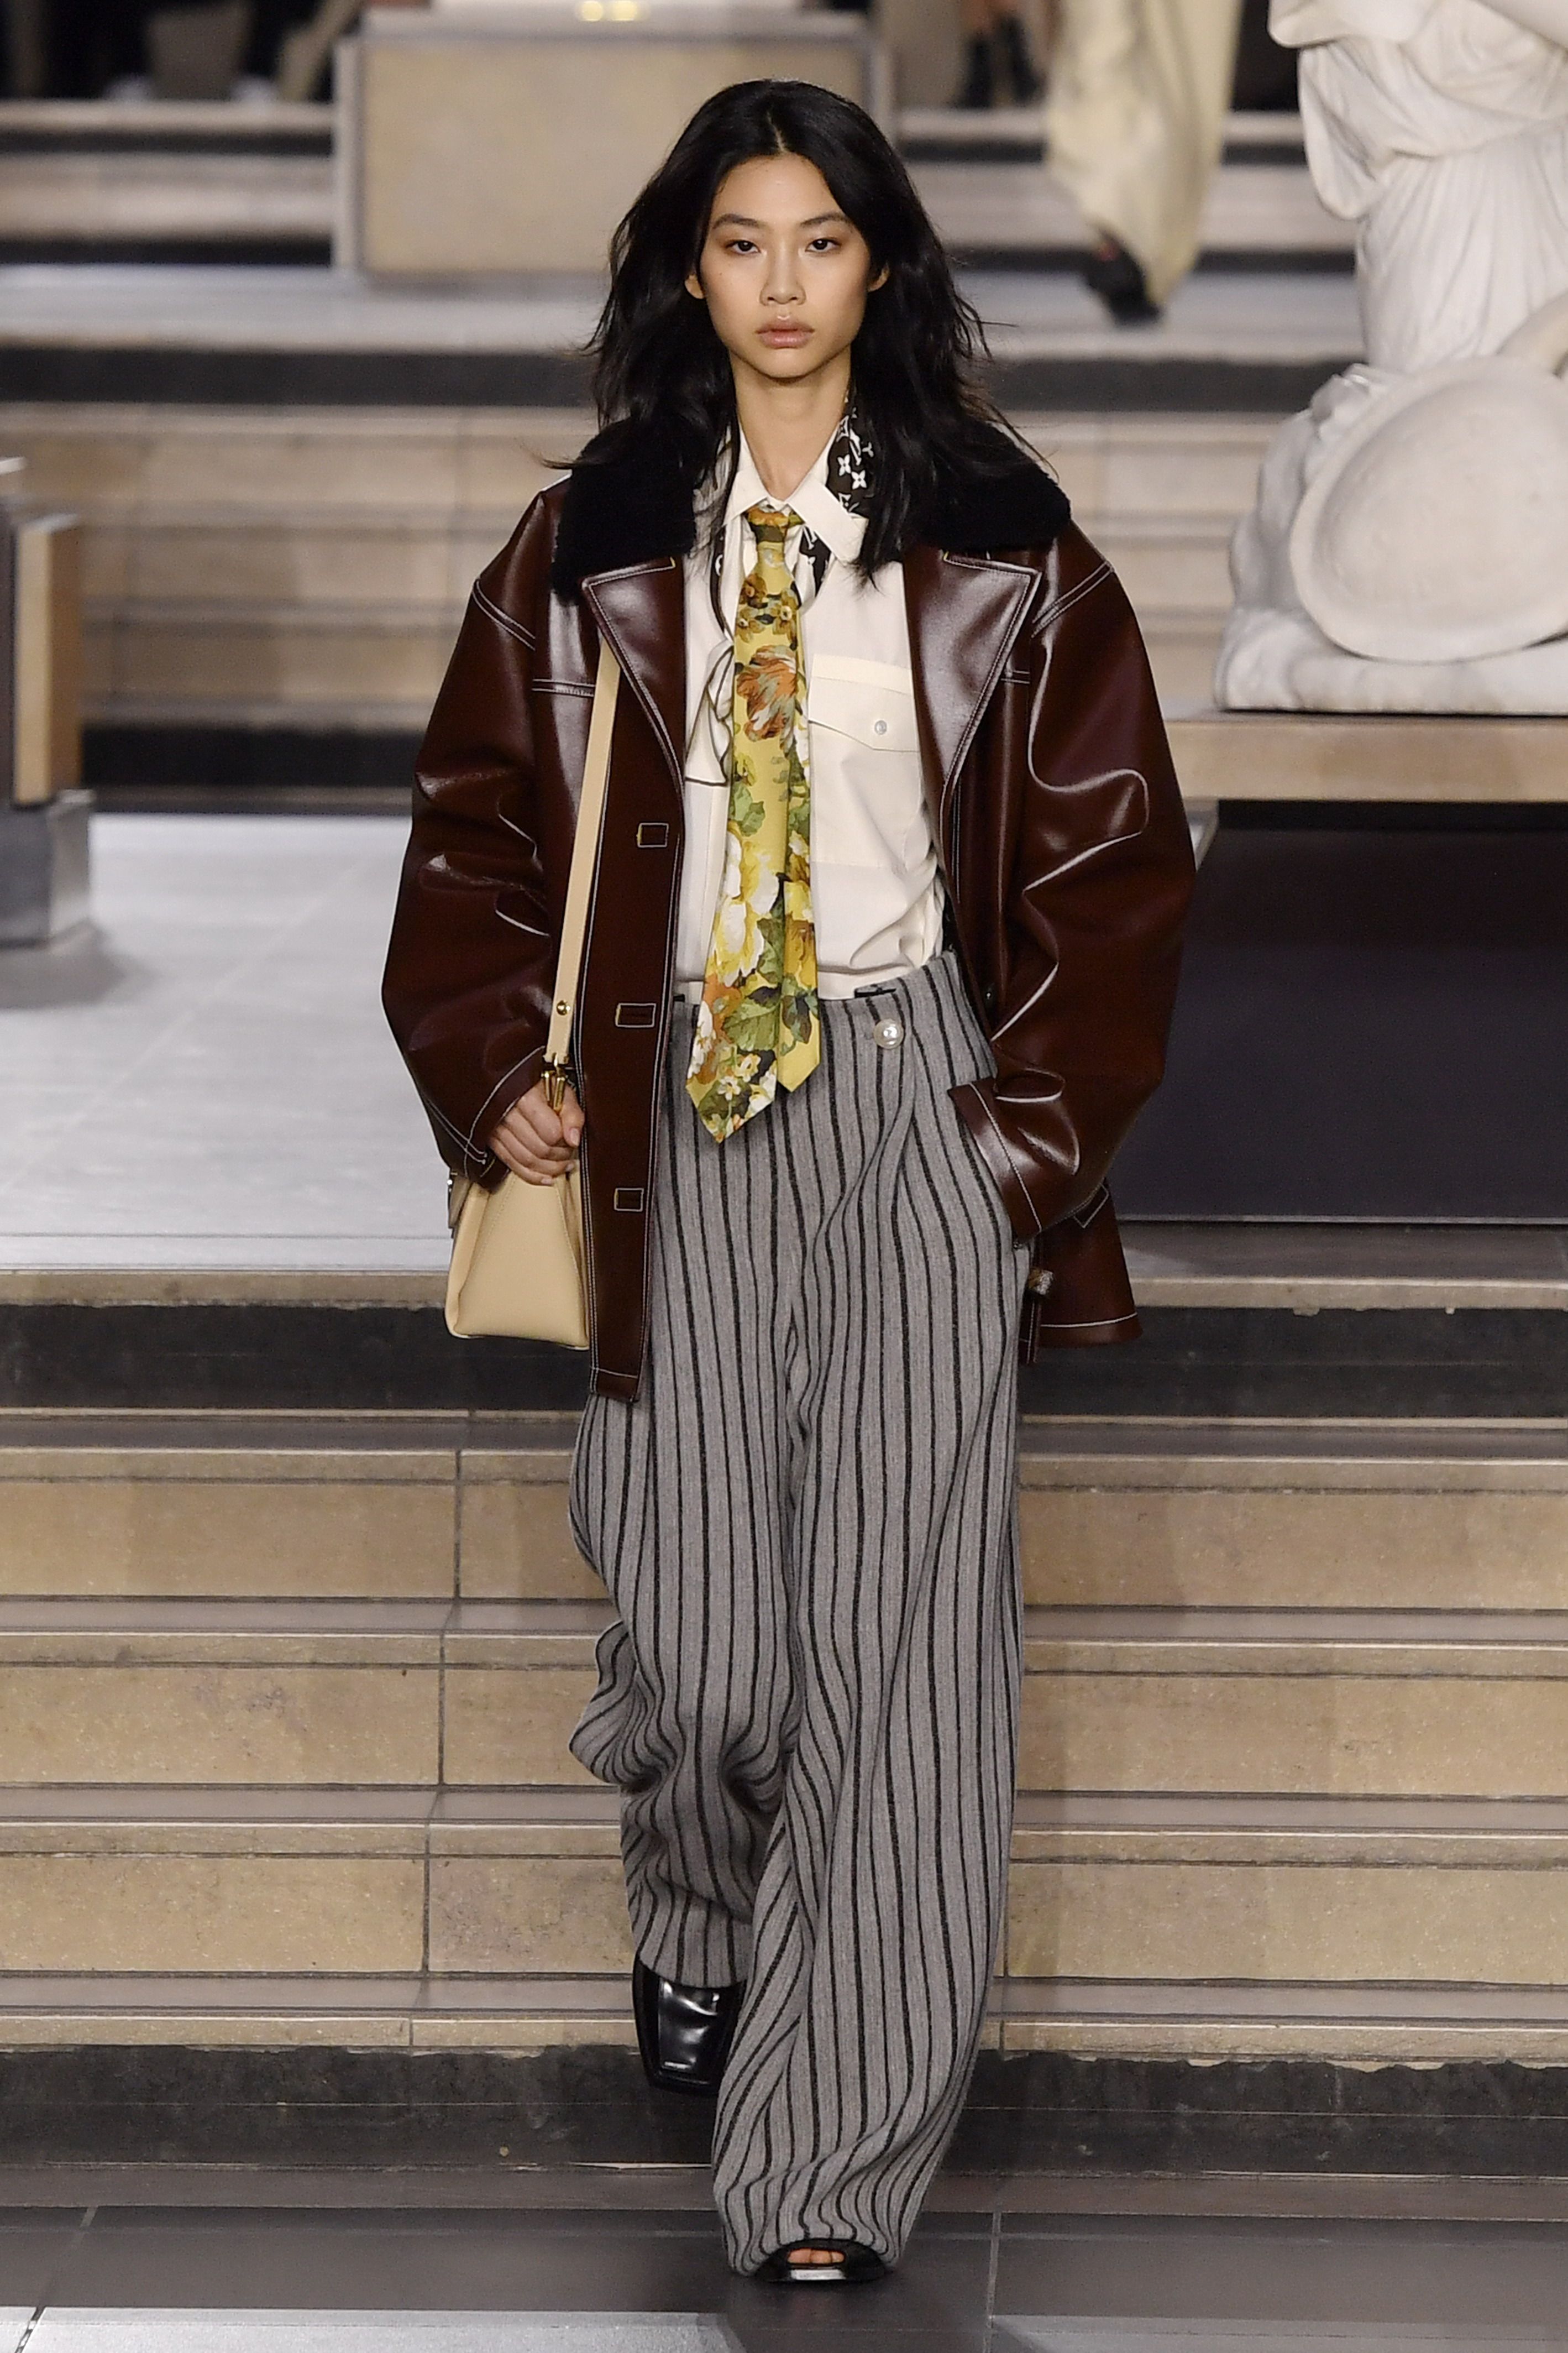 Street Style At Louis Vuitton's Fall 2022 Show Paid Tribute To